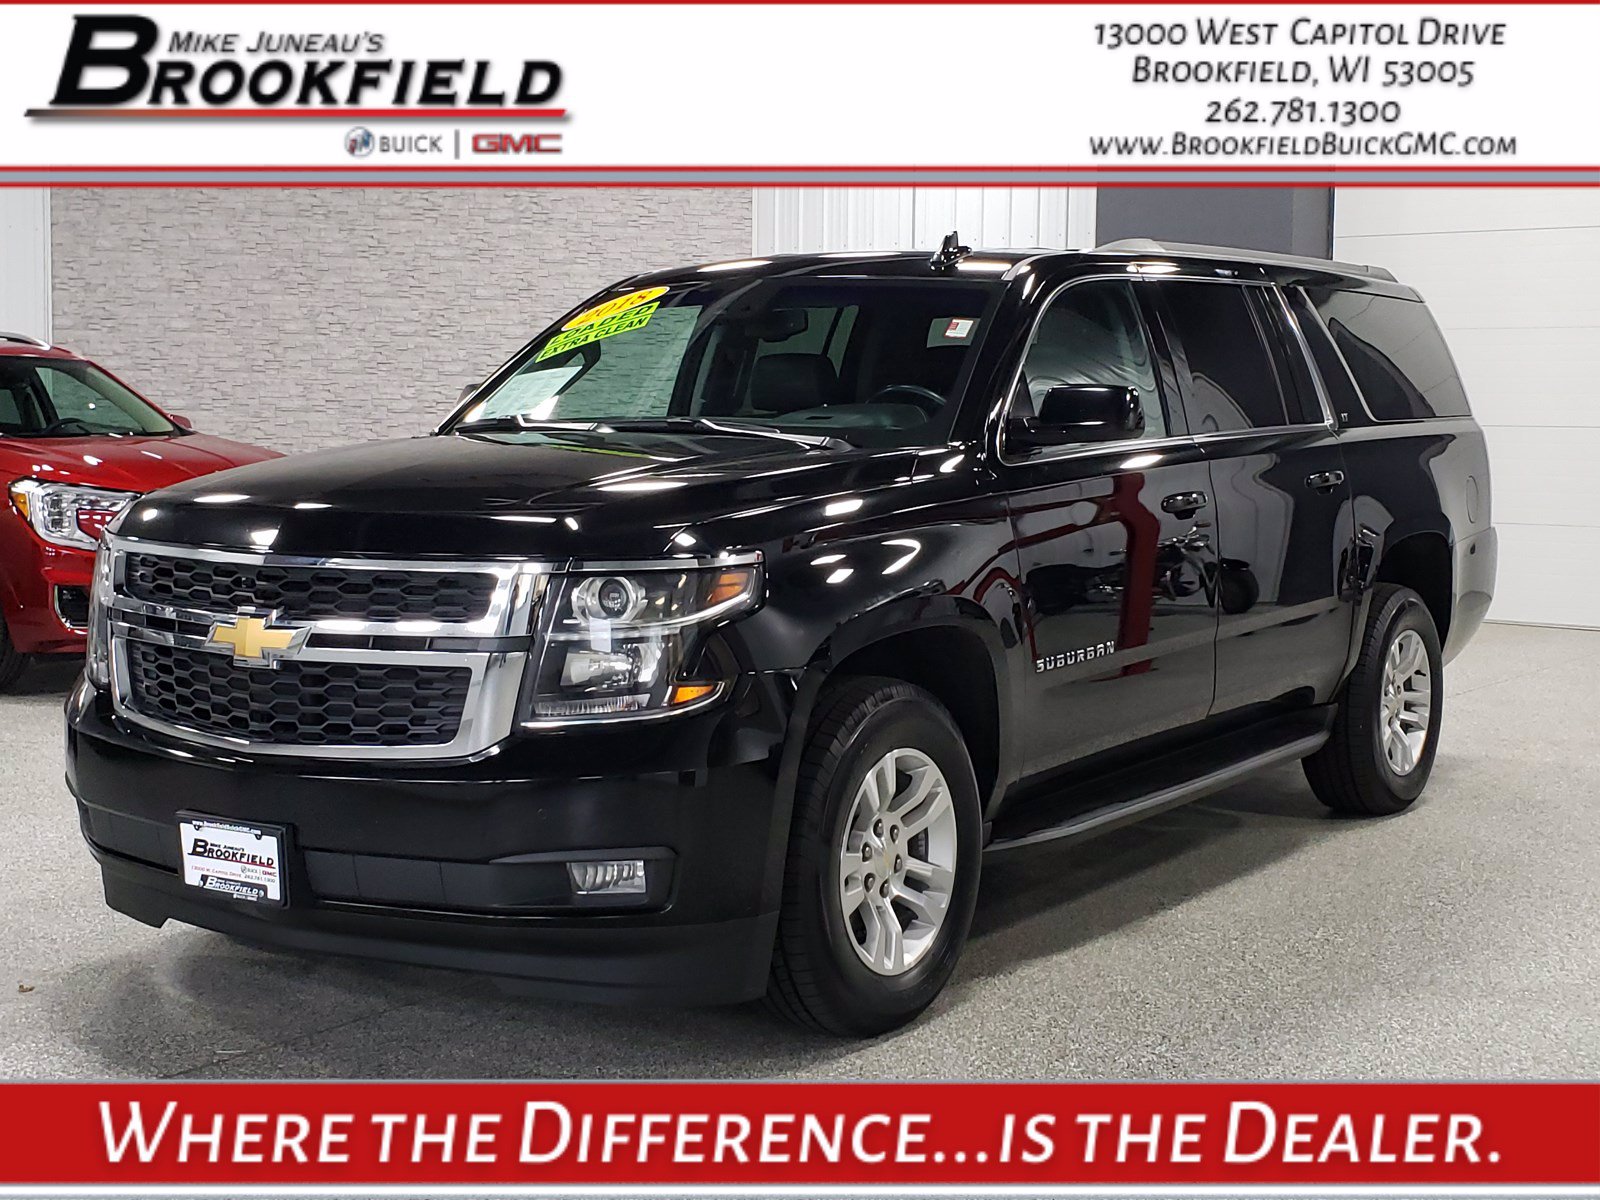 Used Chevrolet Suburban Brookfield Wi